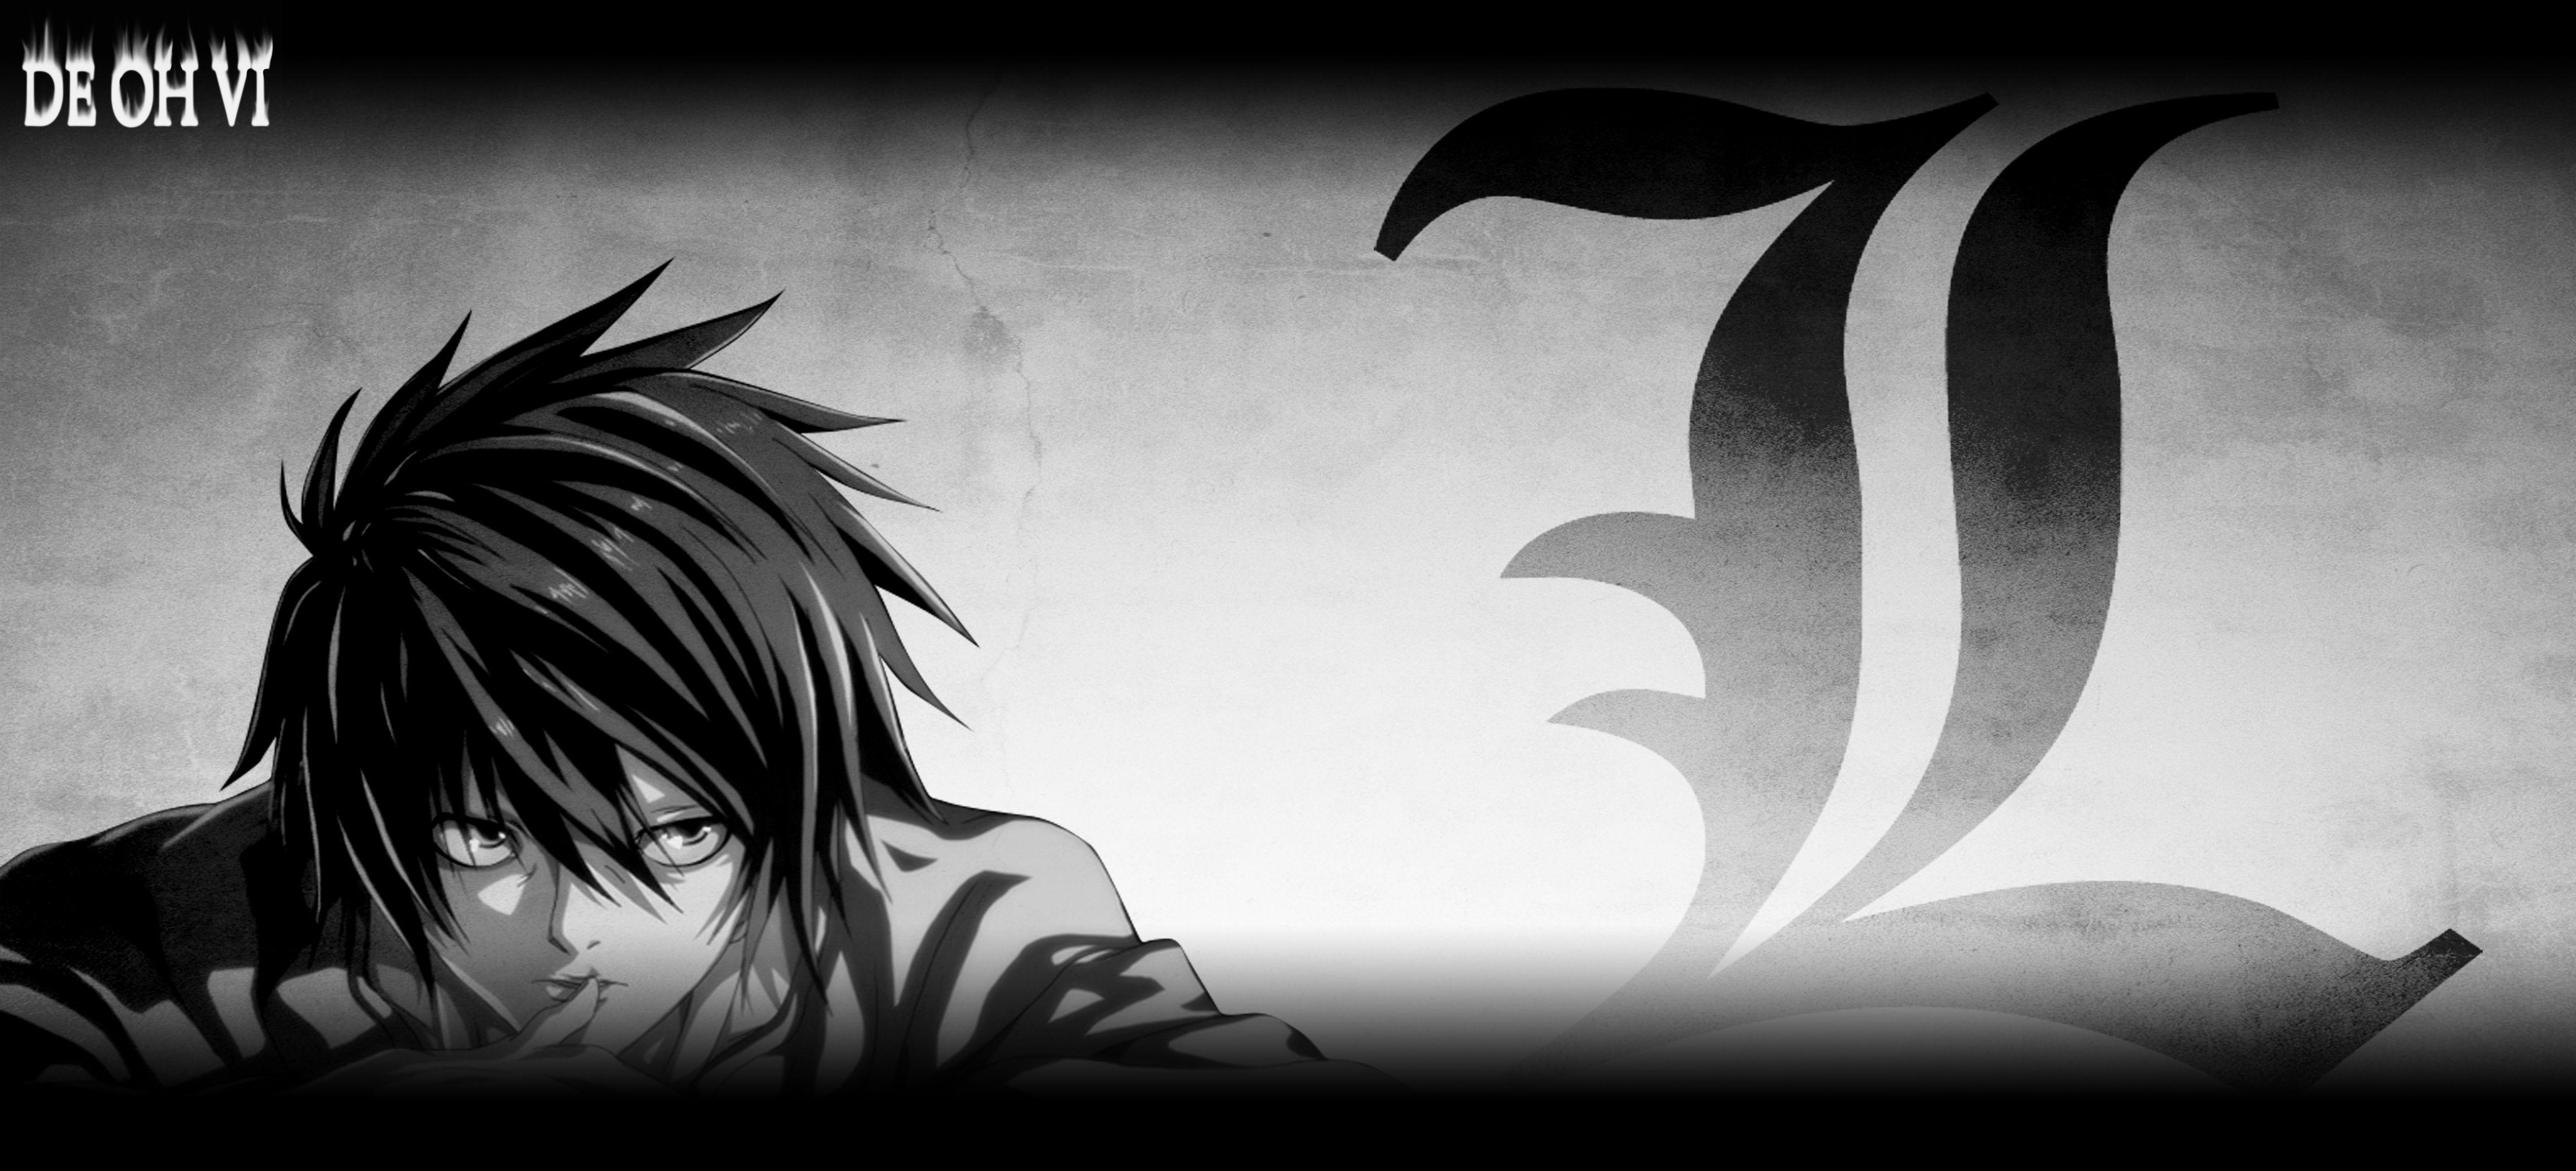 L Lawliet Wallpapers Top Free L Lawliet Backgrounds Wallpaperaccess Just another wallpaper i've taken and fitted it for using it as background on my ipod. l lawliet wallpapers top free l